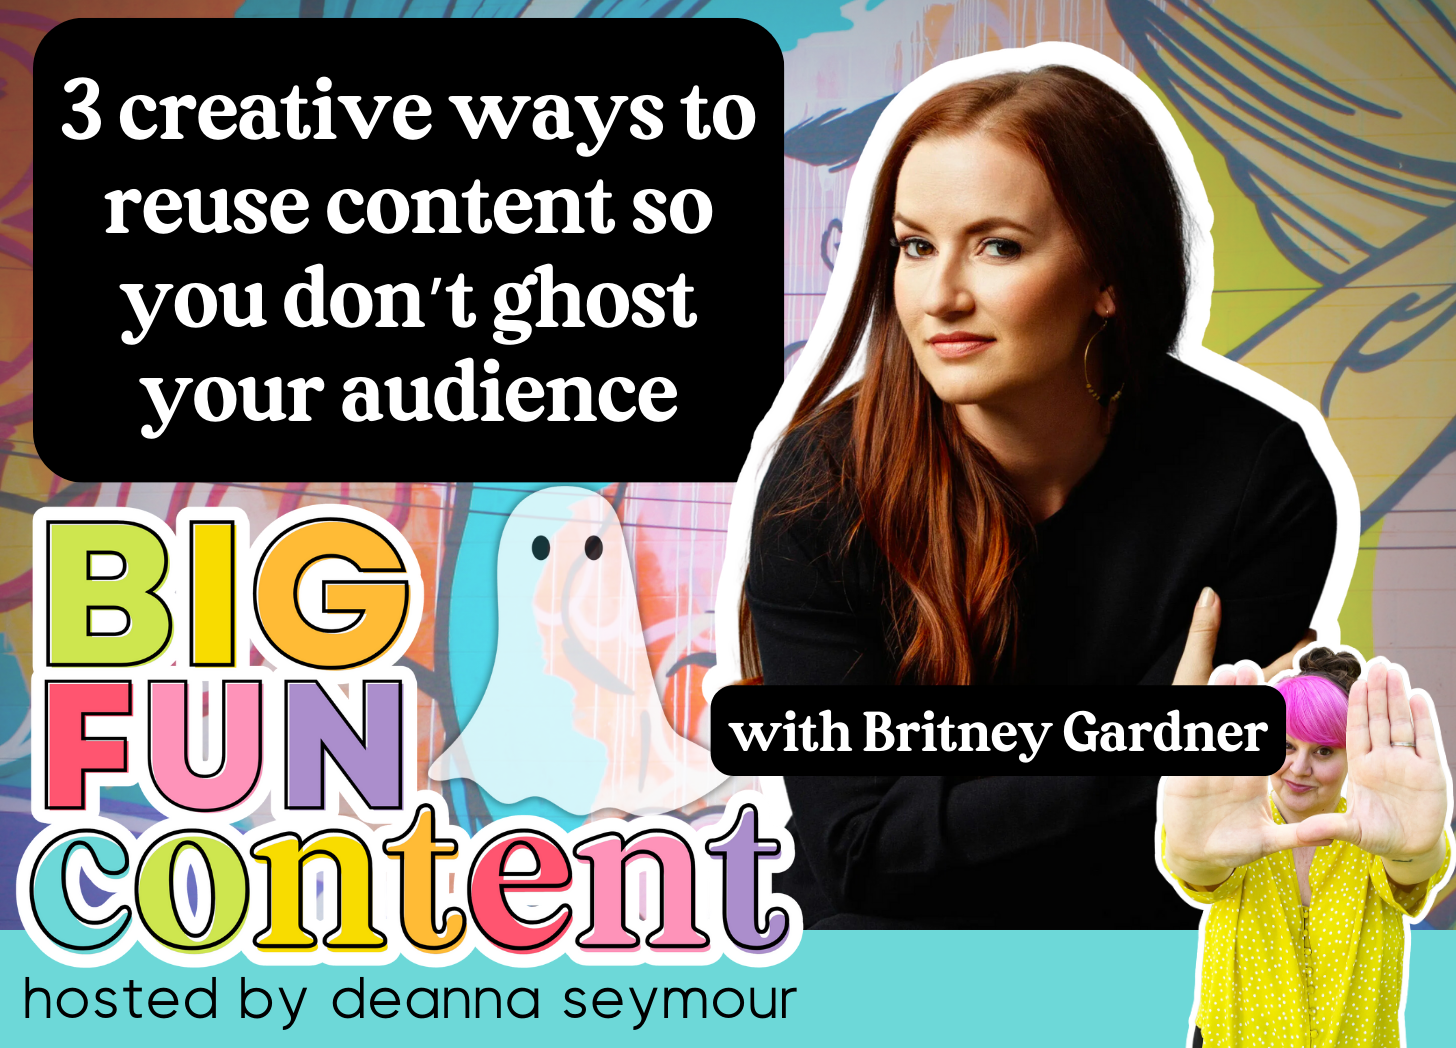 How to reuse content and not ghost your audience with Britney Gardner on the Big Fun Content Podcast hosted by Deanna seymour. Cartoon ghosts and colorful words